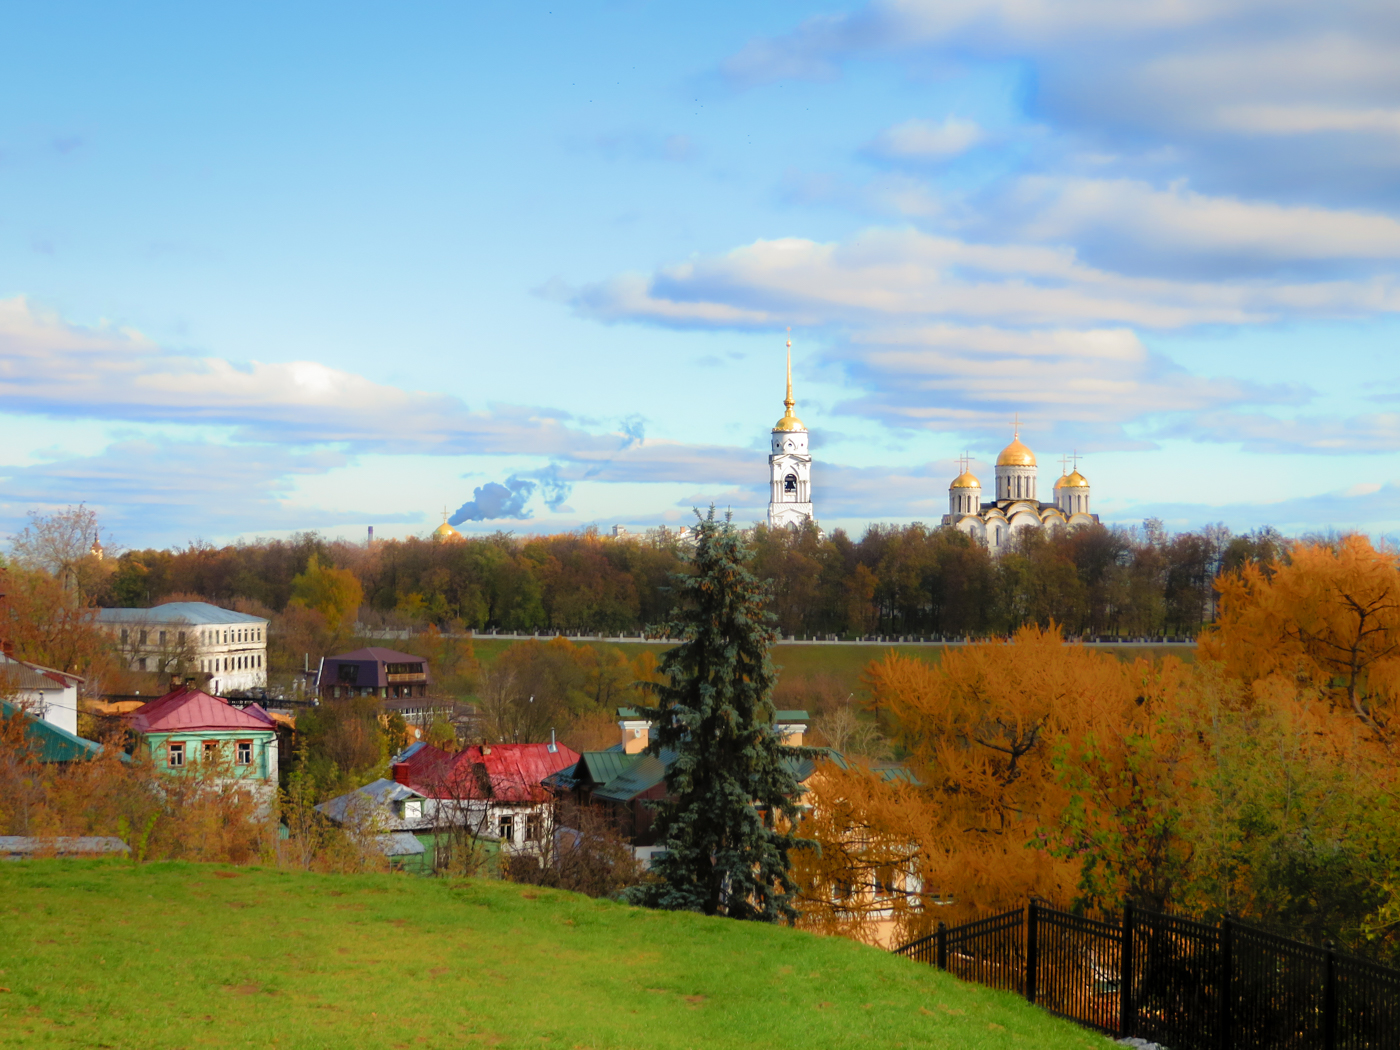 A countryside village with few houses and an Orthodox Church in the background and trees with the autumn colours in a bright day